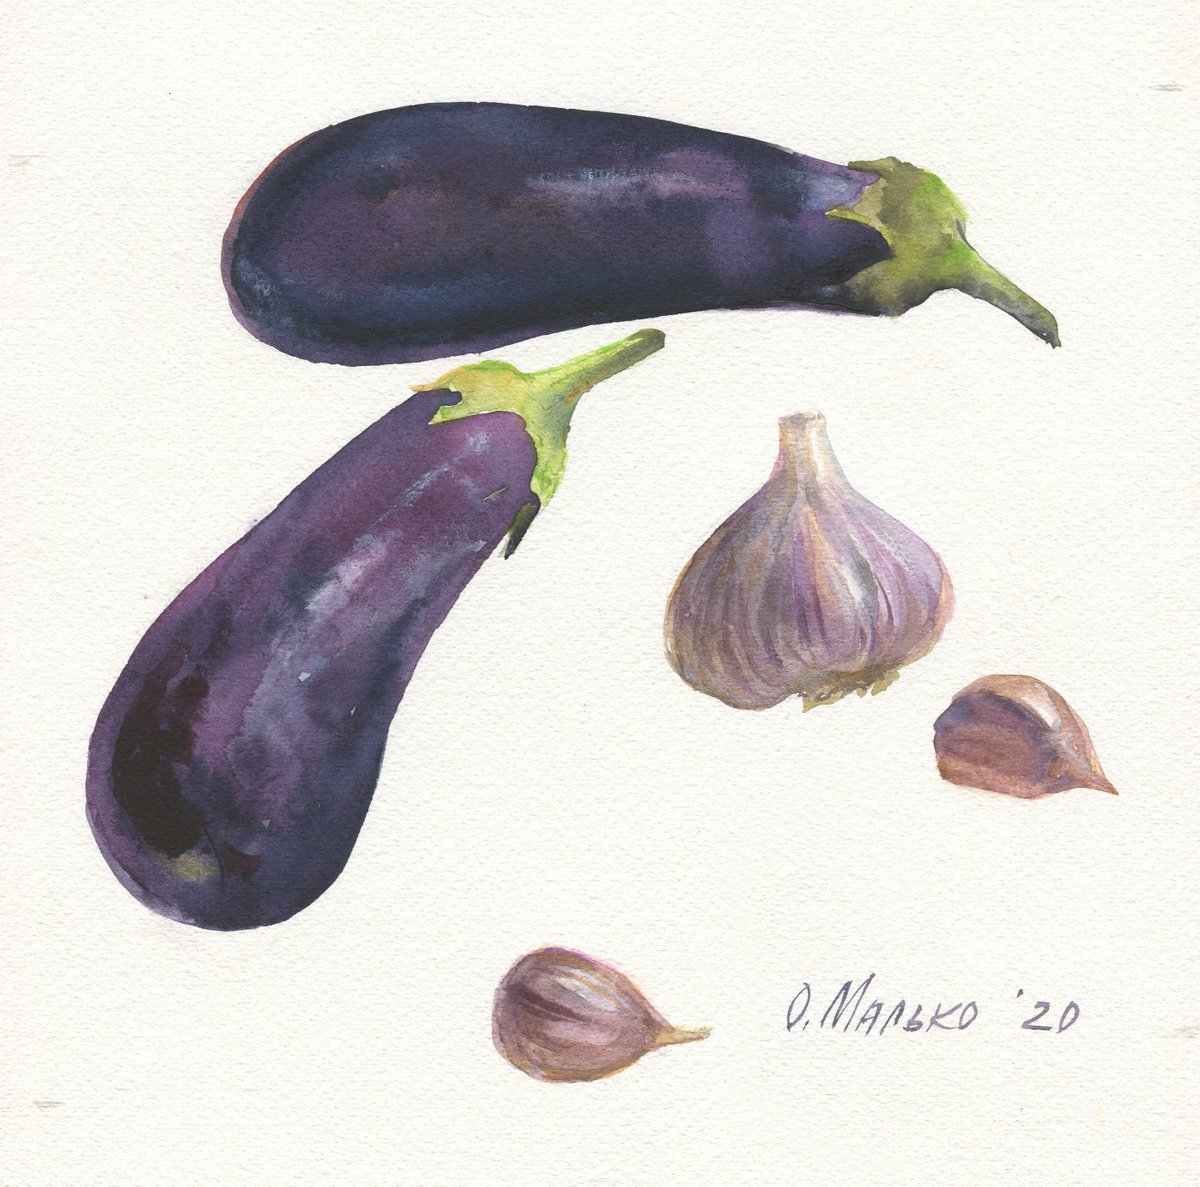 Veggies 5. Eggplants and garlic / Contemporary watercolor painting. Vegetables still life. by Olha Malko